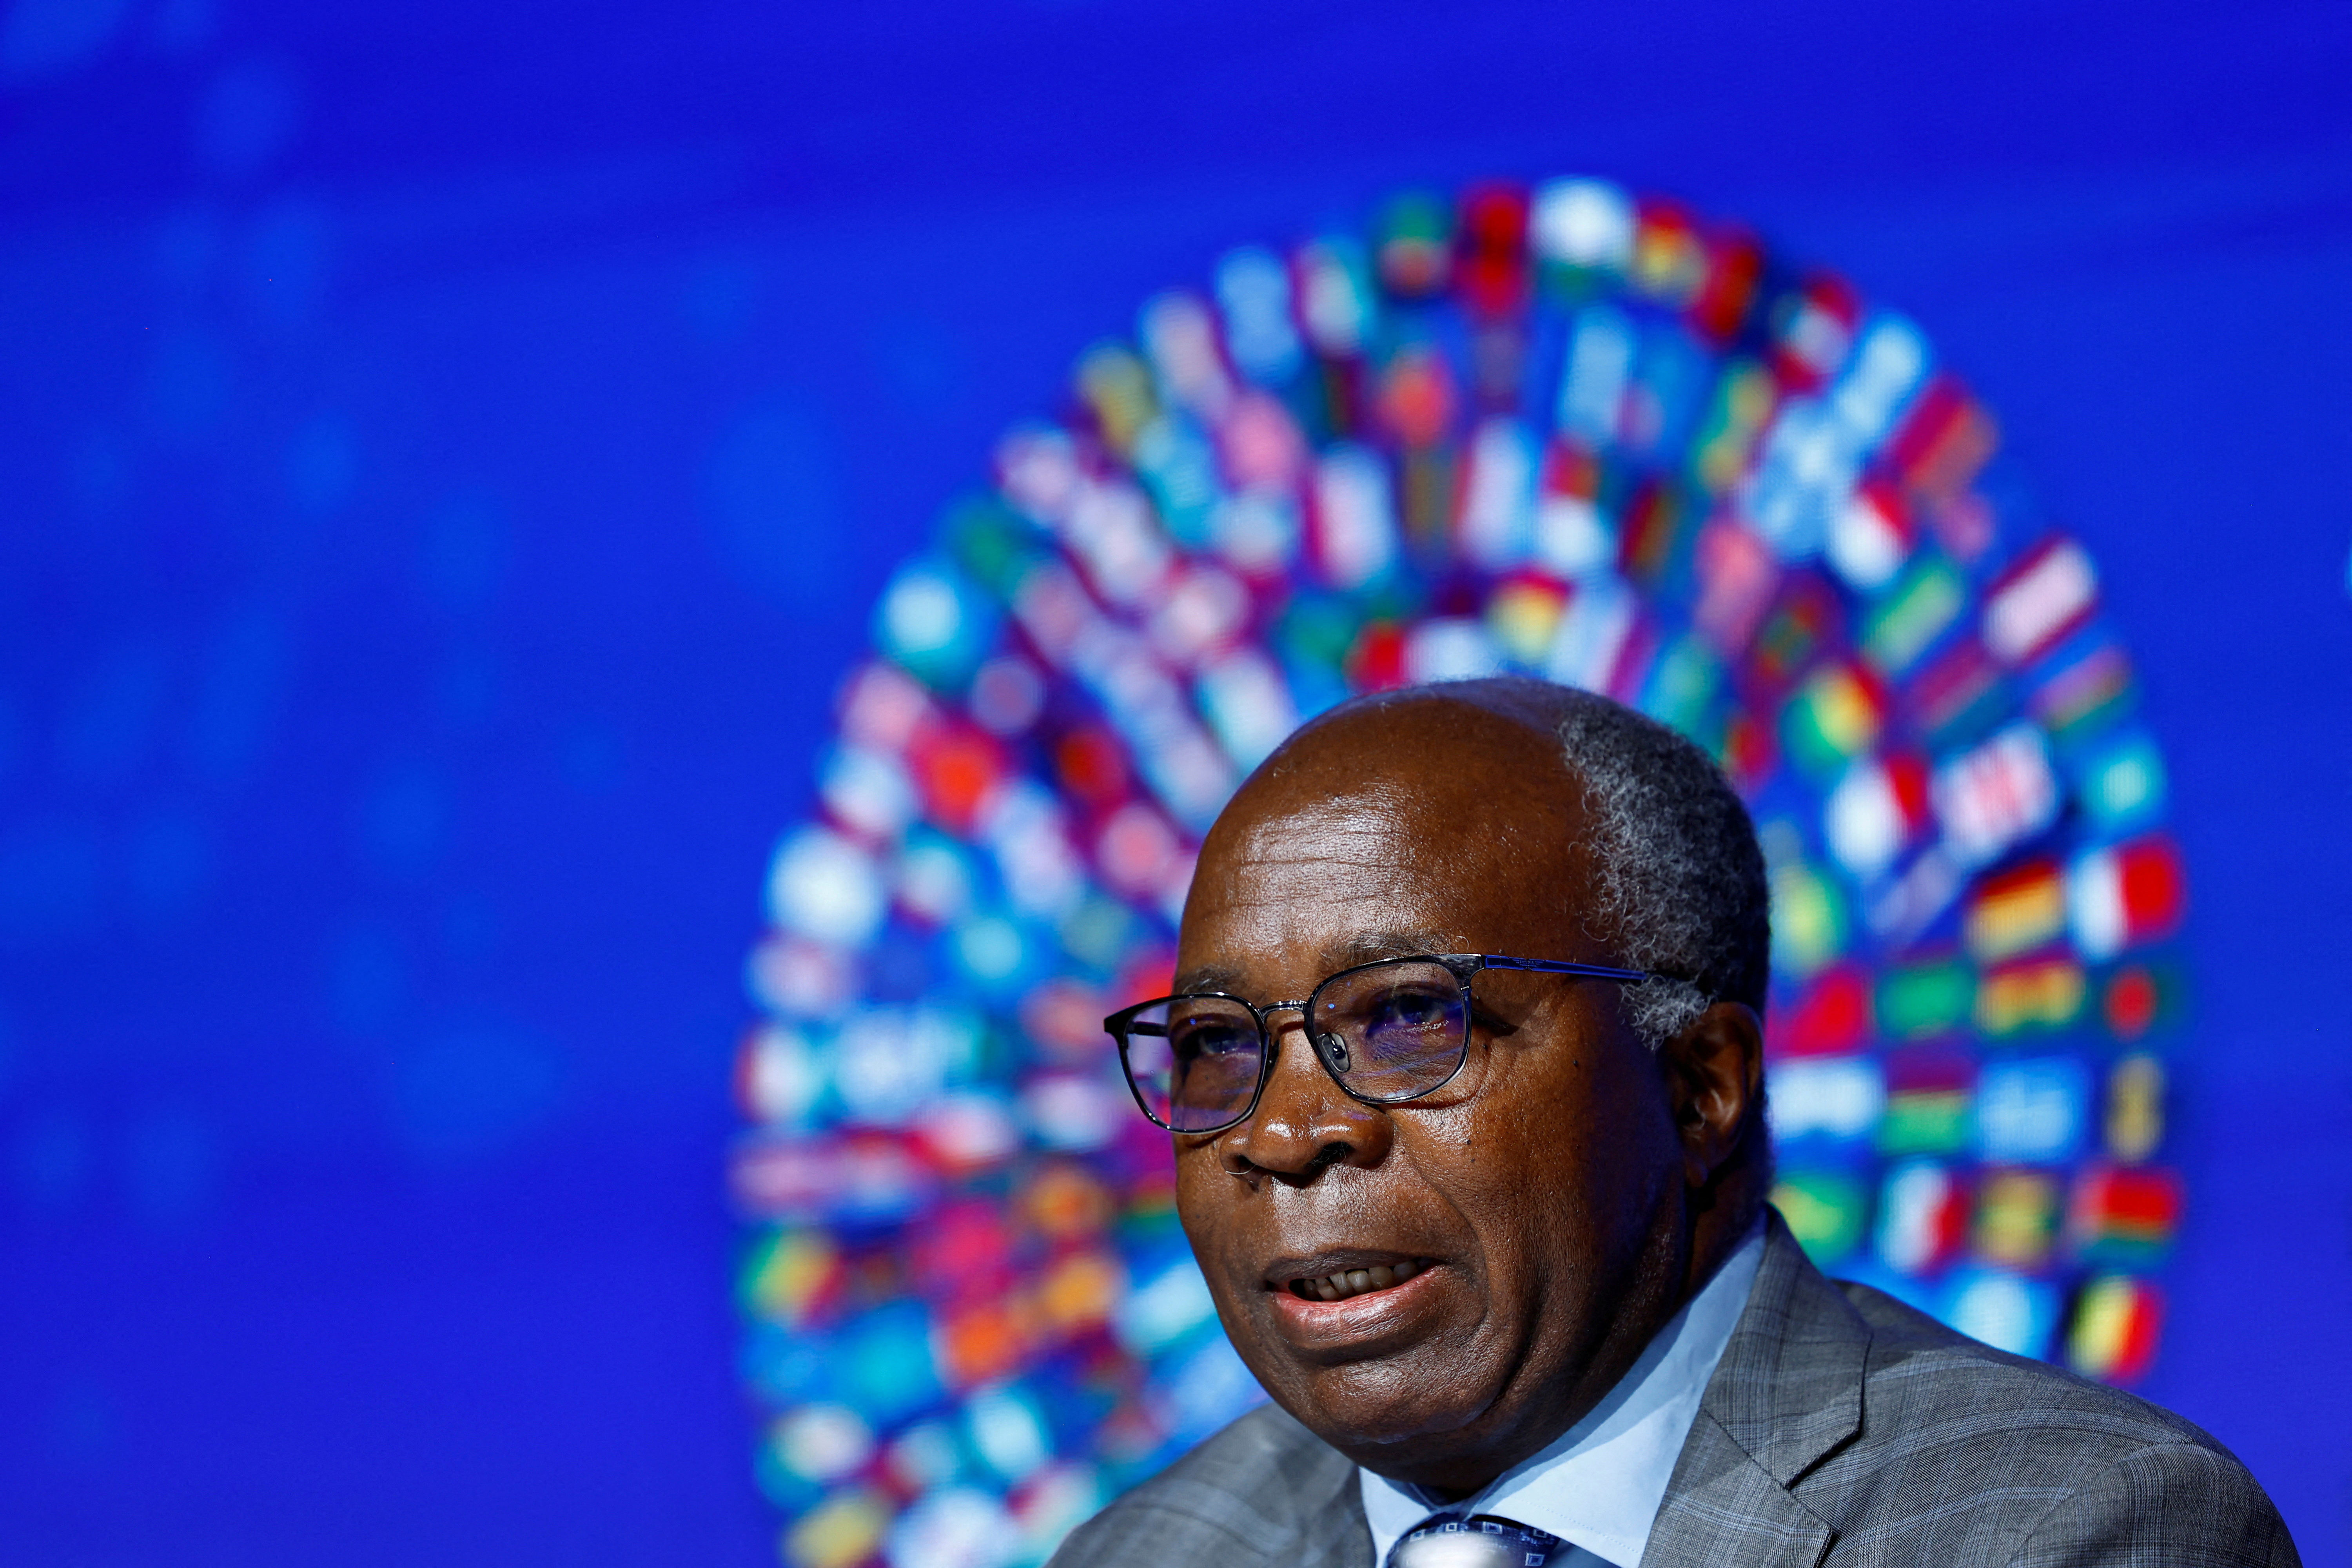 Zambian Finance Minister Situmbeko Musokotwane participates in a panel at the annual meeting of the International Monetary Fund and the World Bank